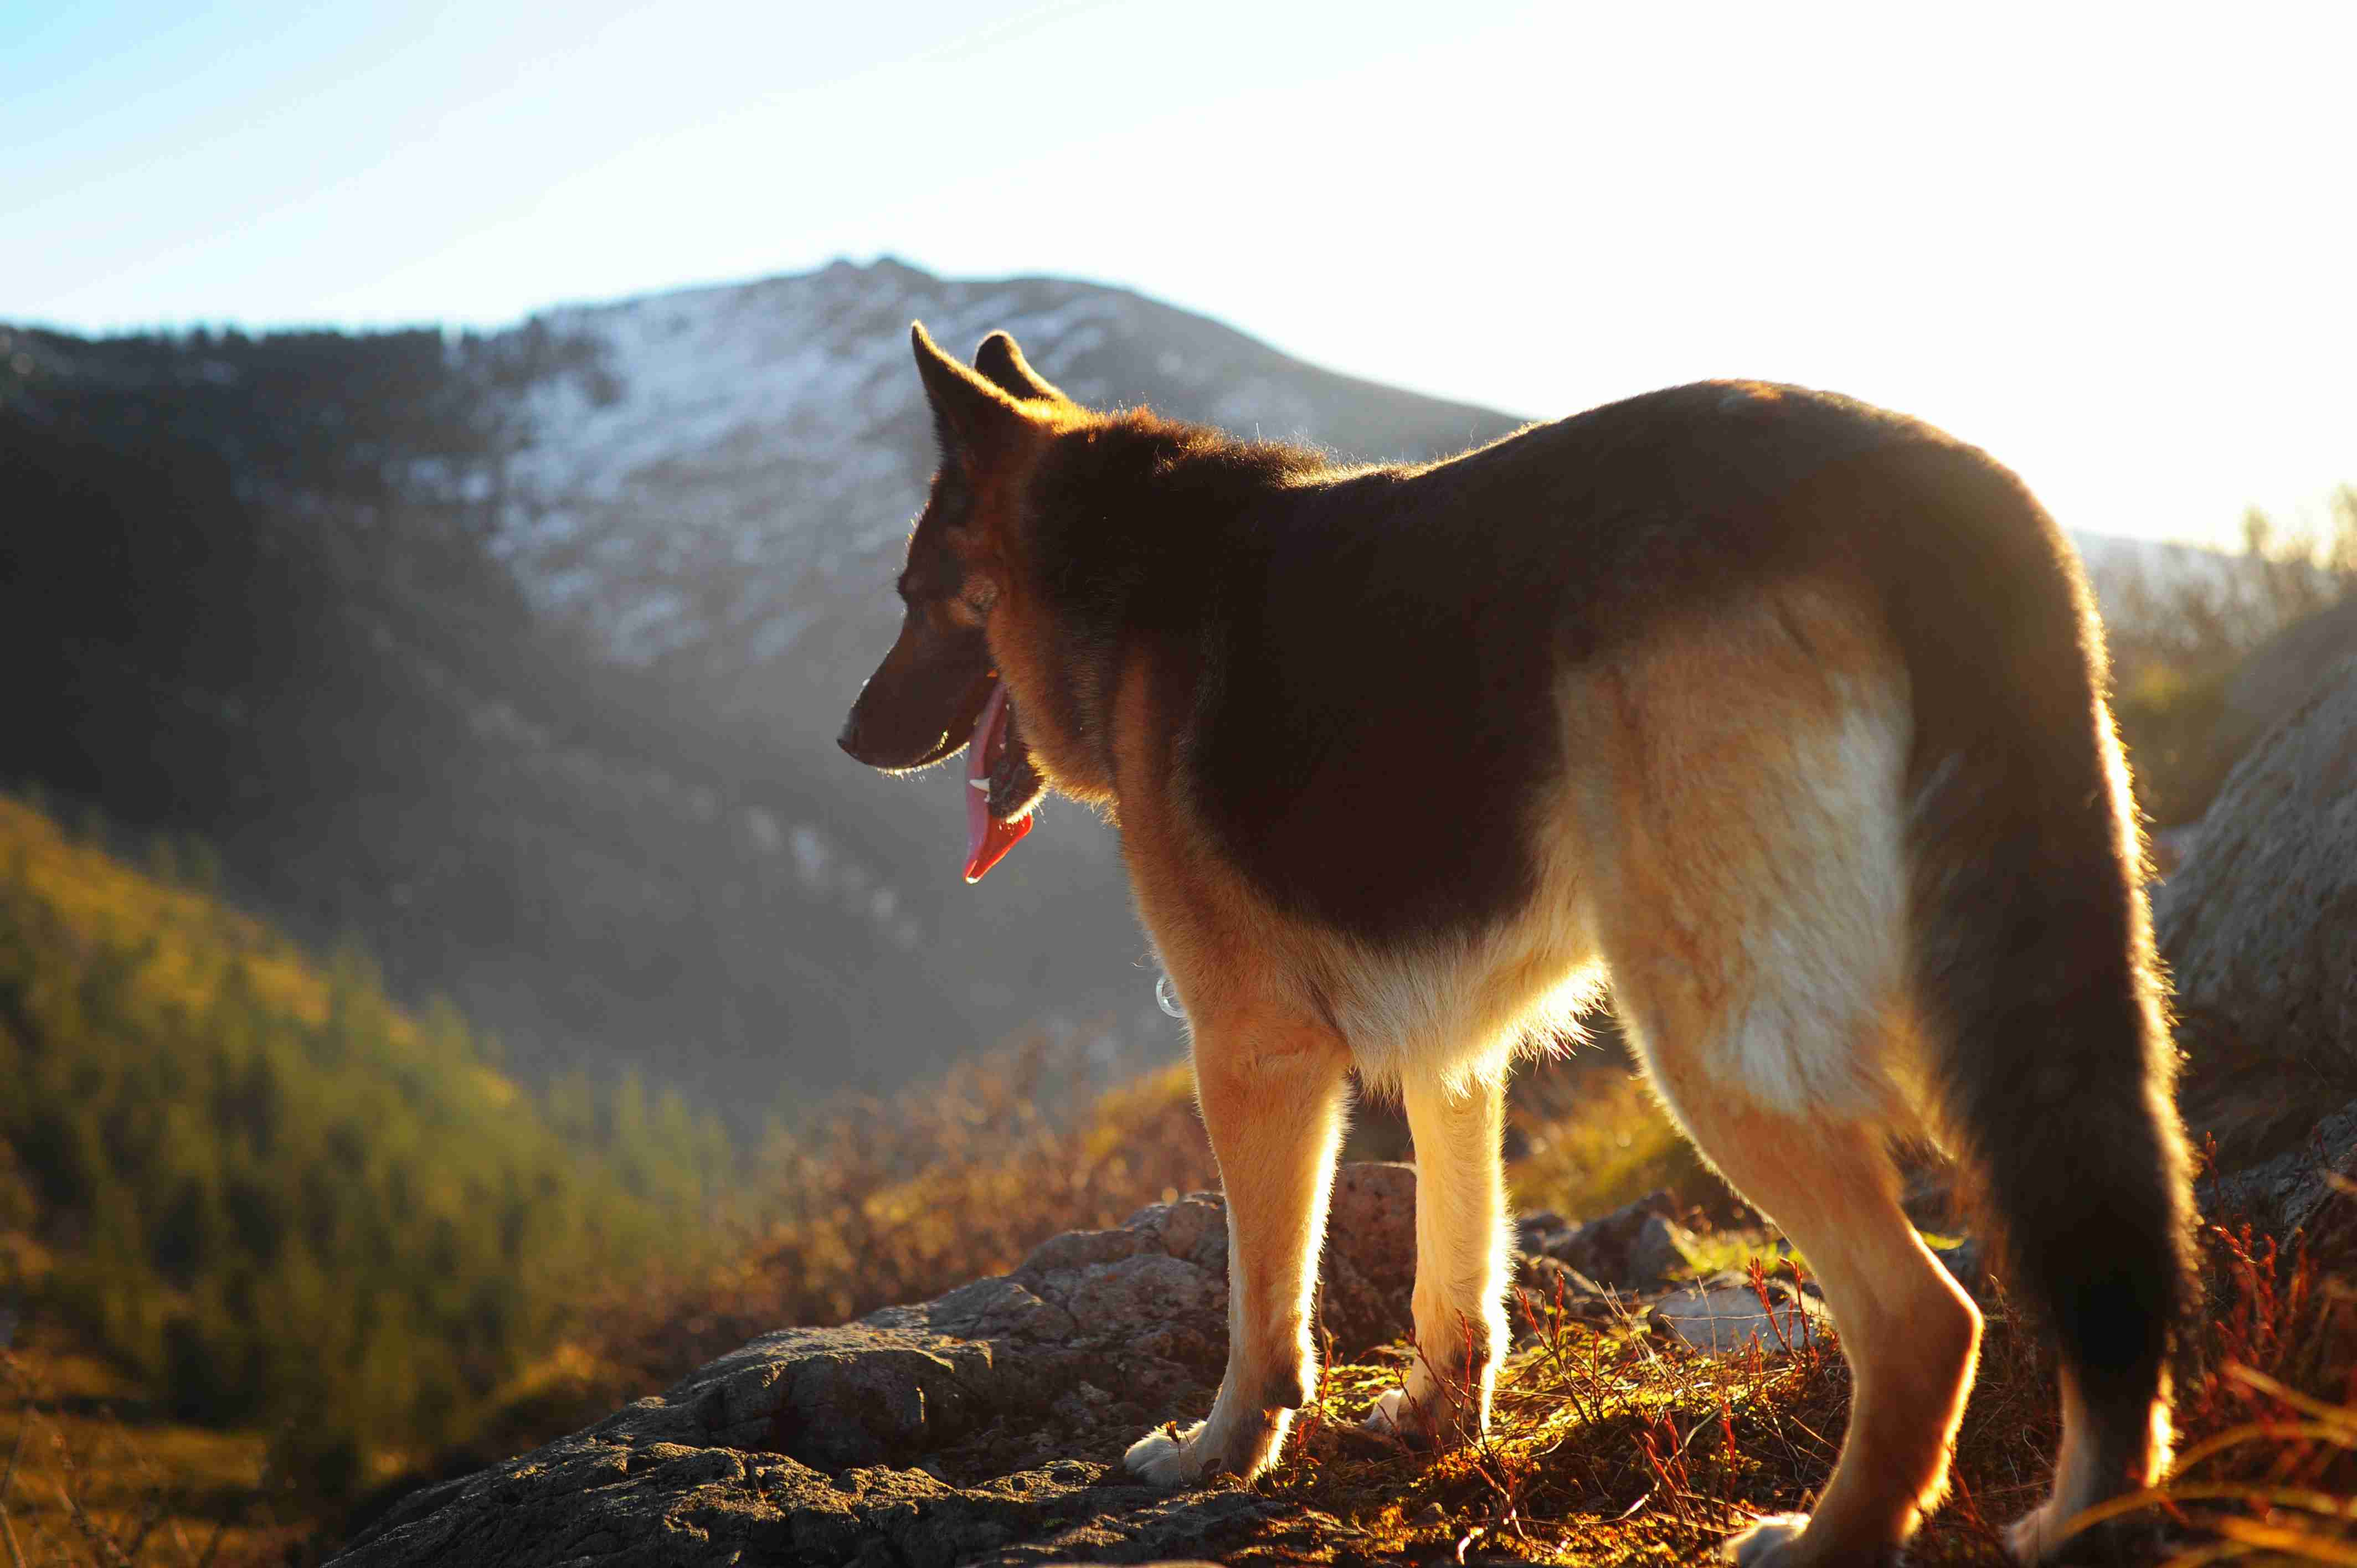 Can German shepherds be trained to become search and rescue dogs?